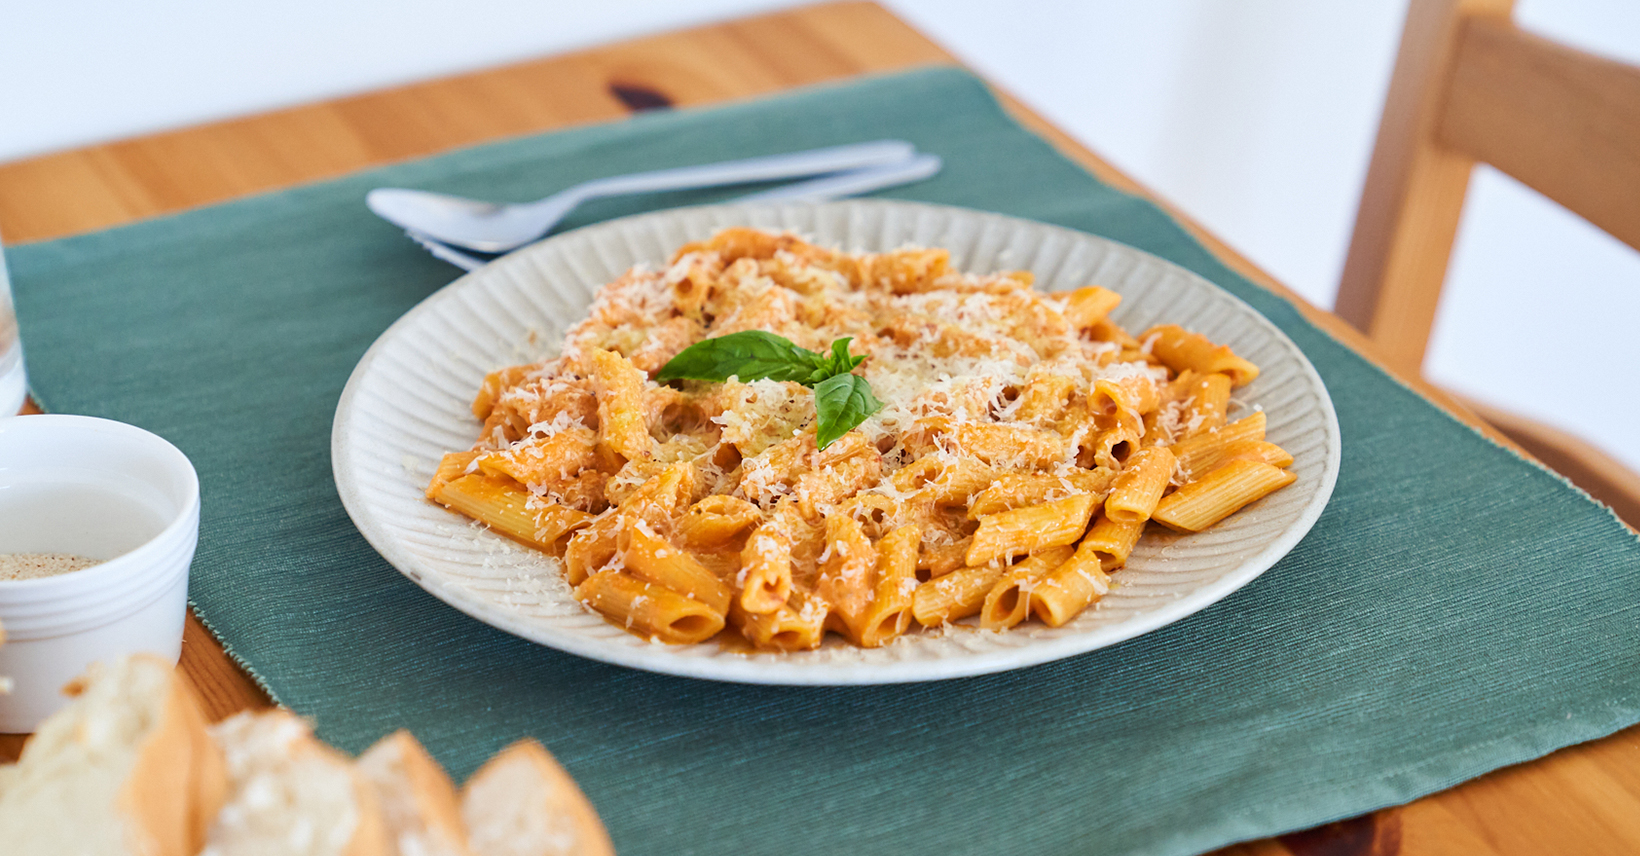 Vodka penne pasta made with the Australian Organic Food Co. pasta sauce